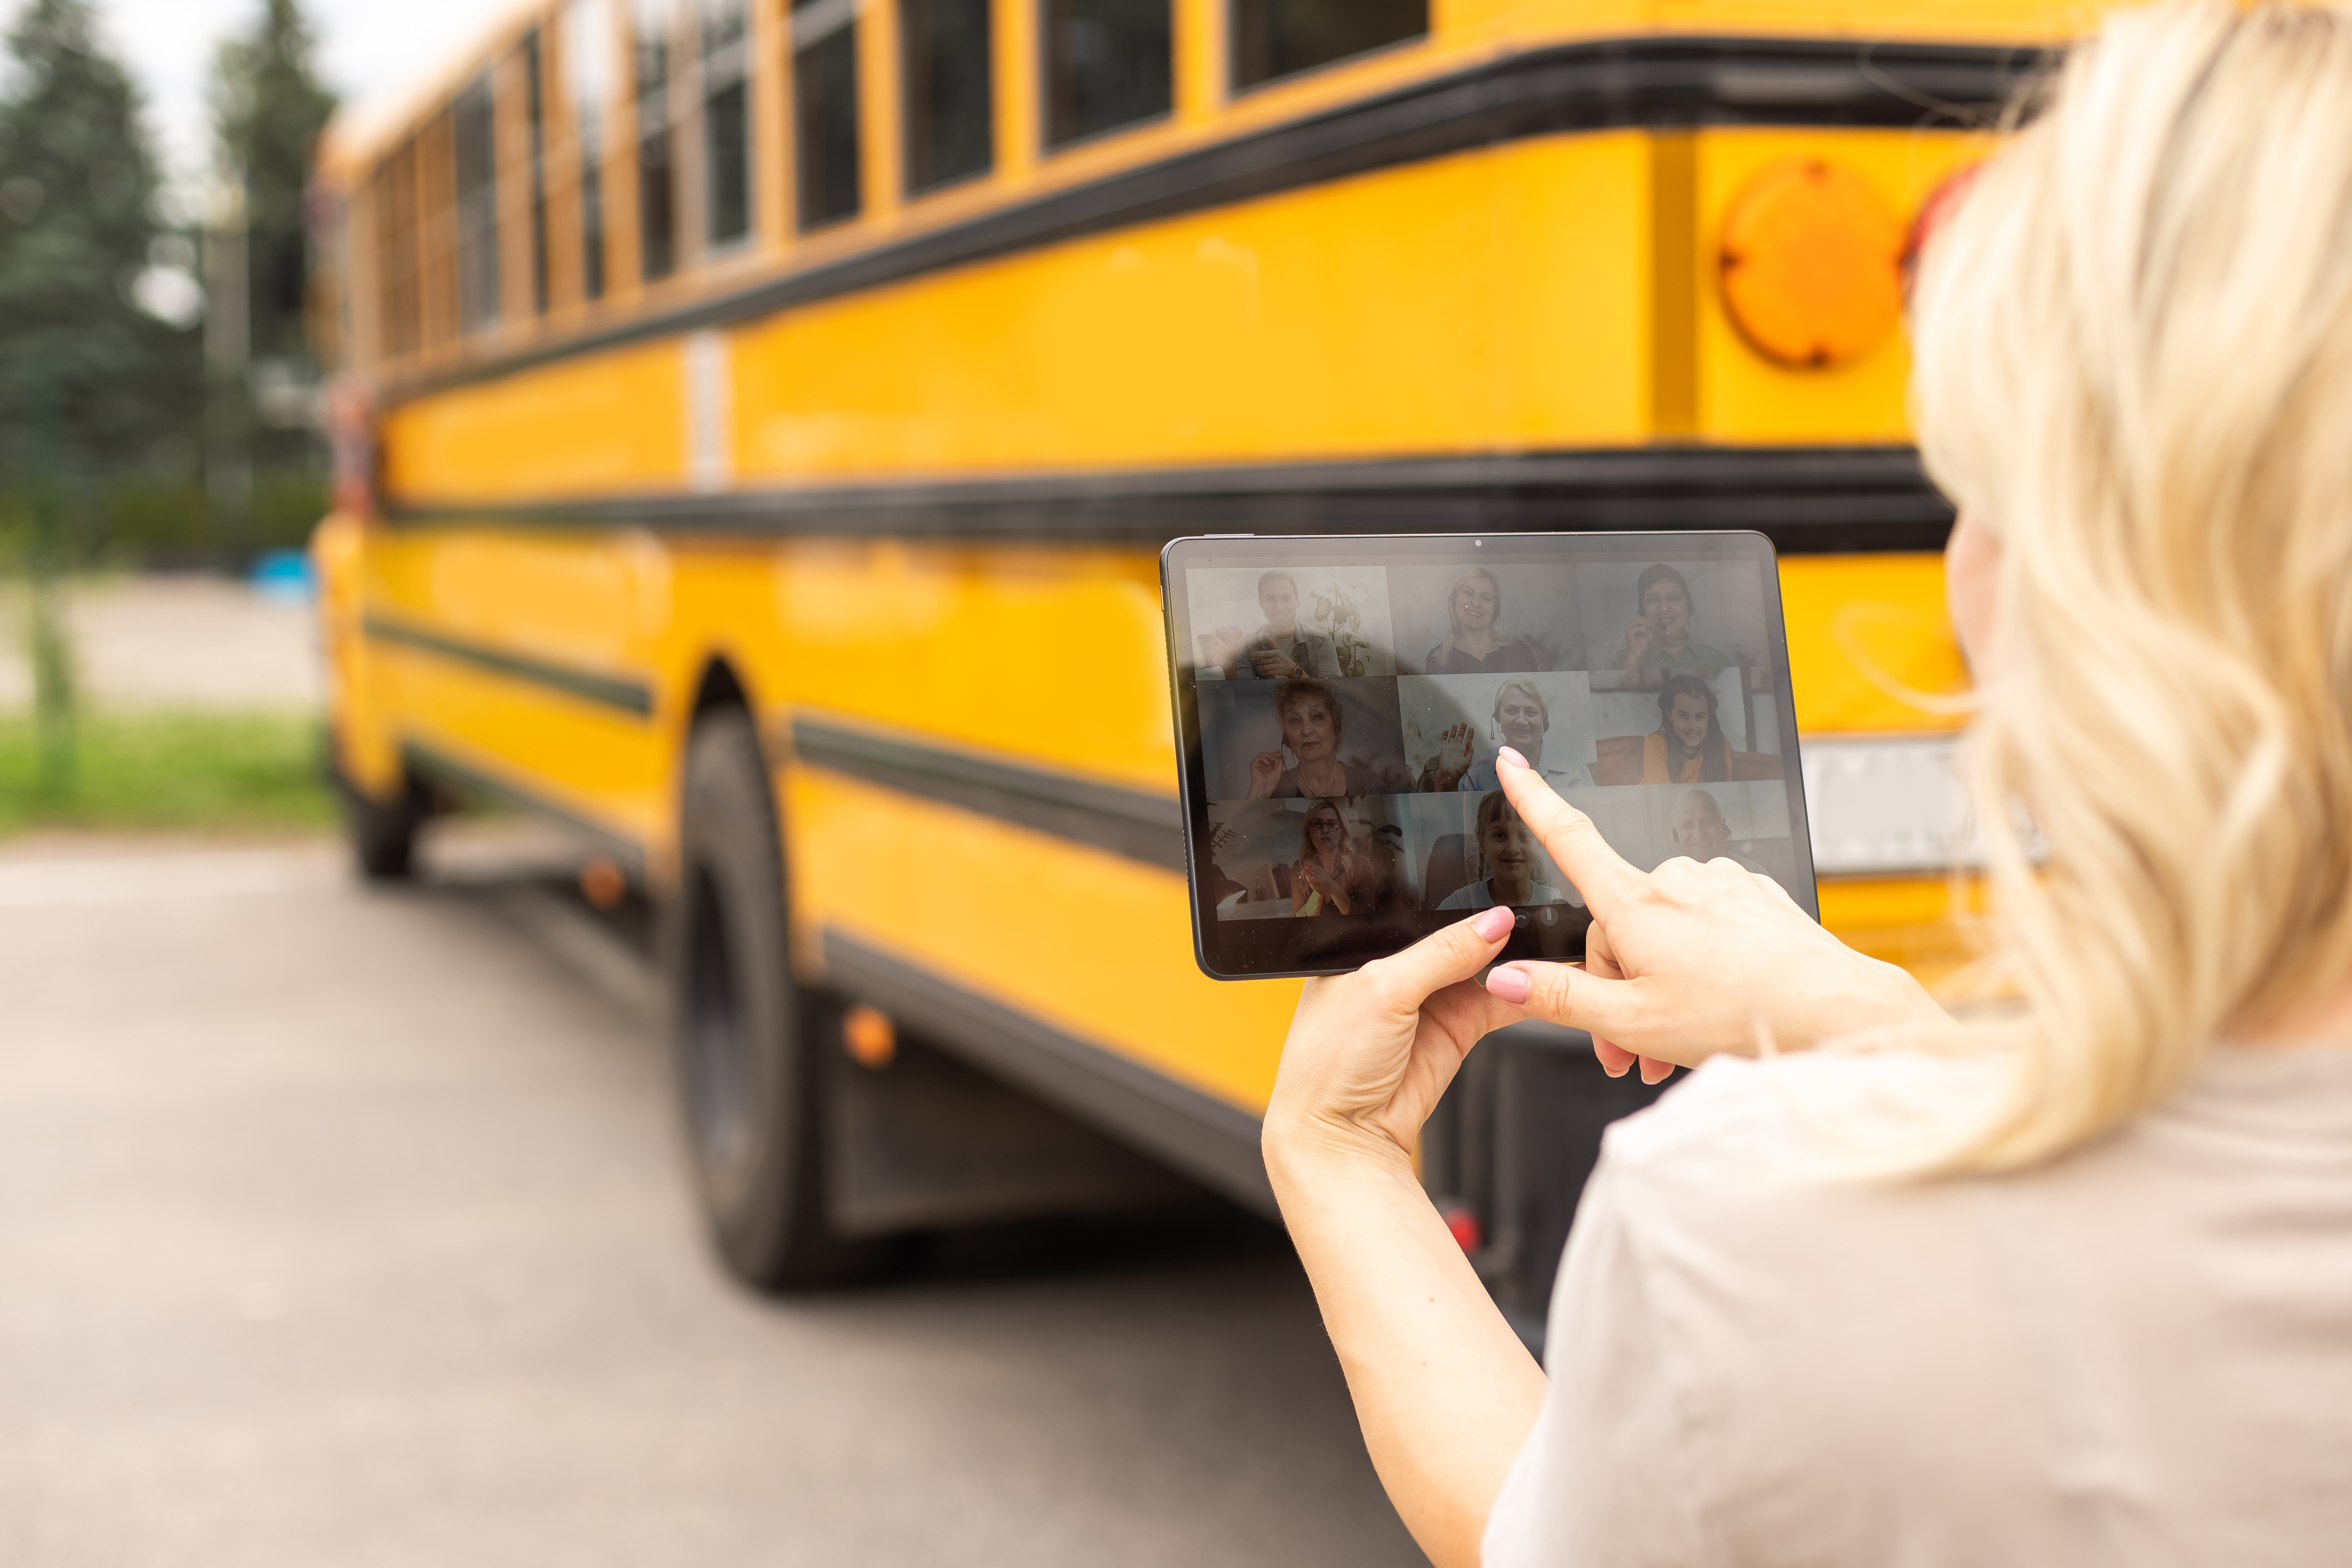 SpaceX wants to put Starlink internet on rural school buses